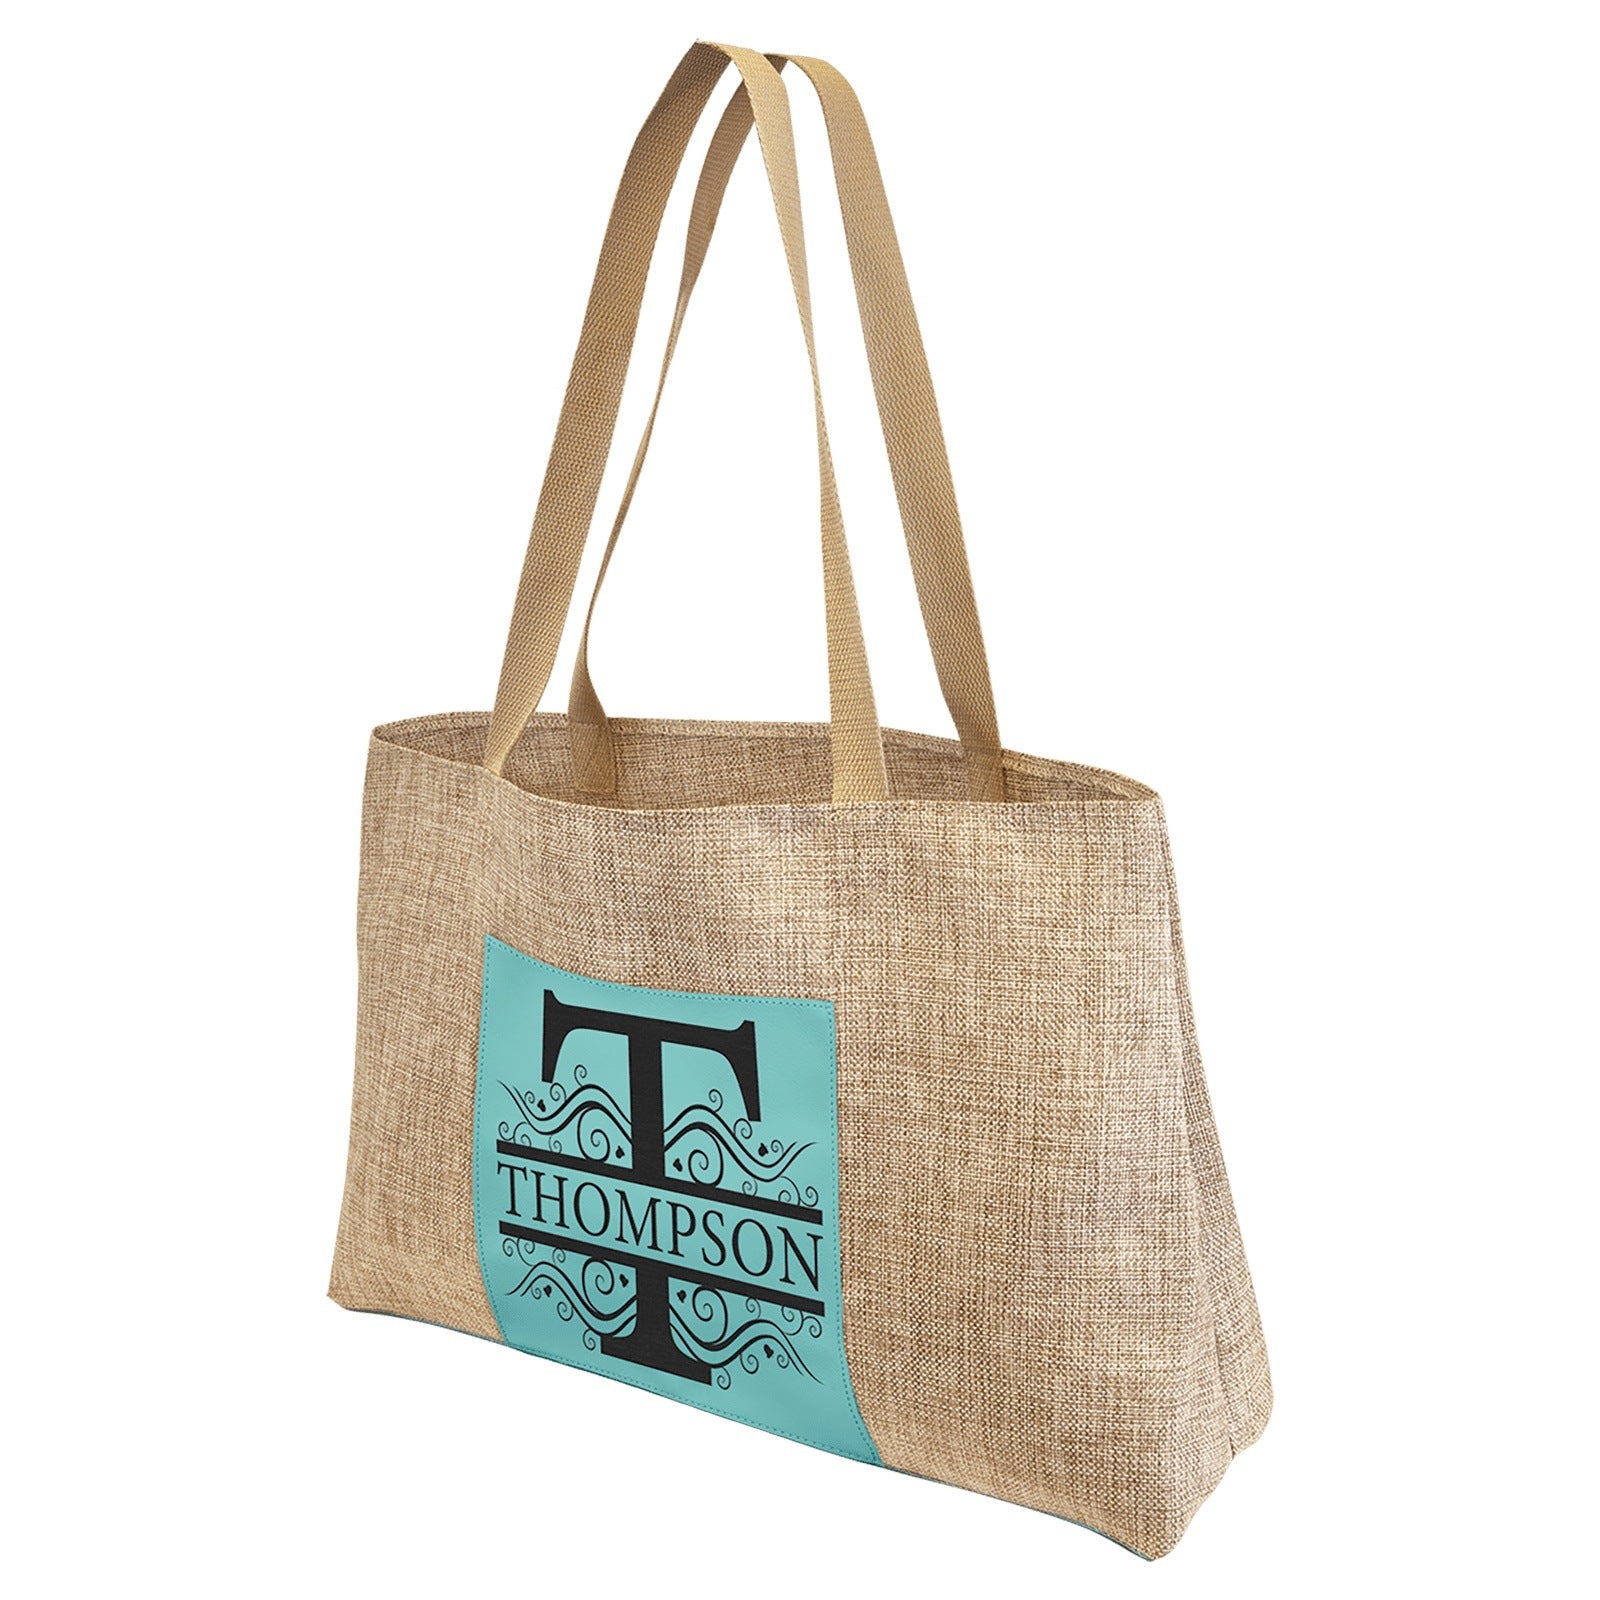 Burlap Canvas Personalized Tote | Bridesmade gift | Gift for her |